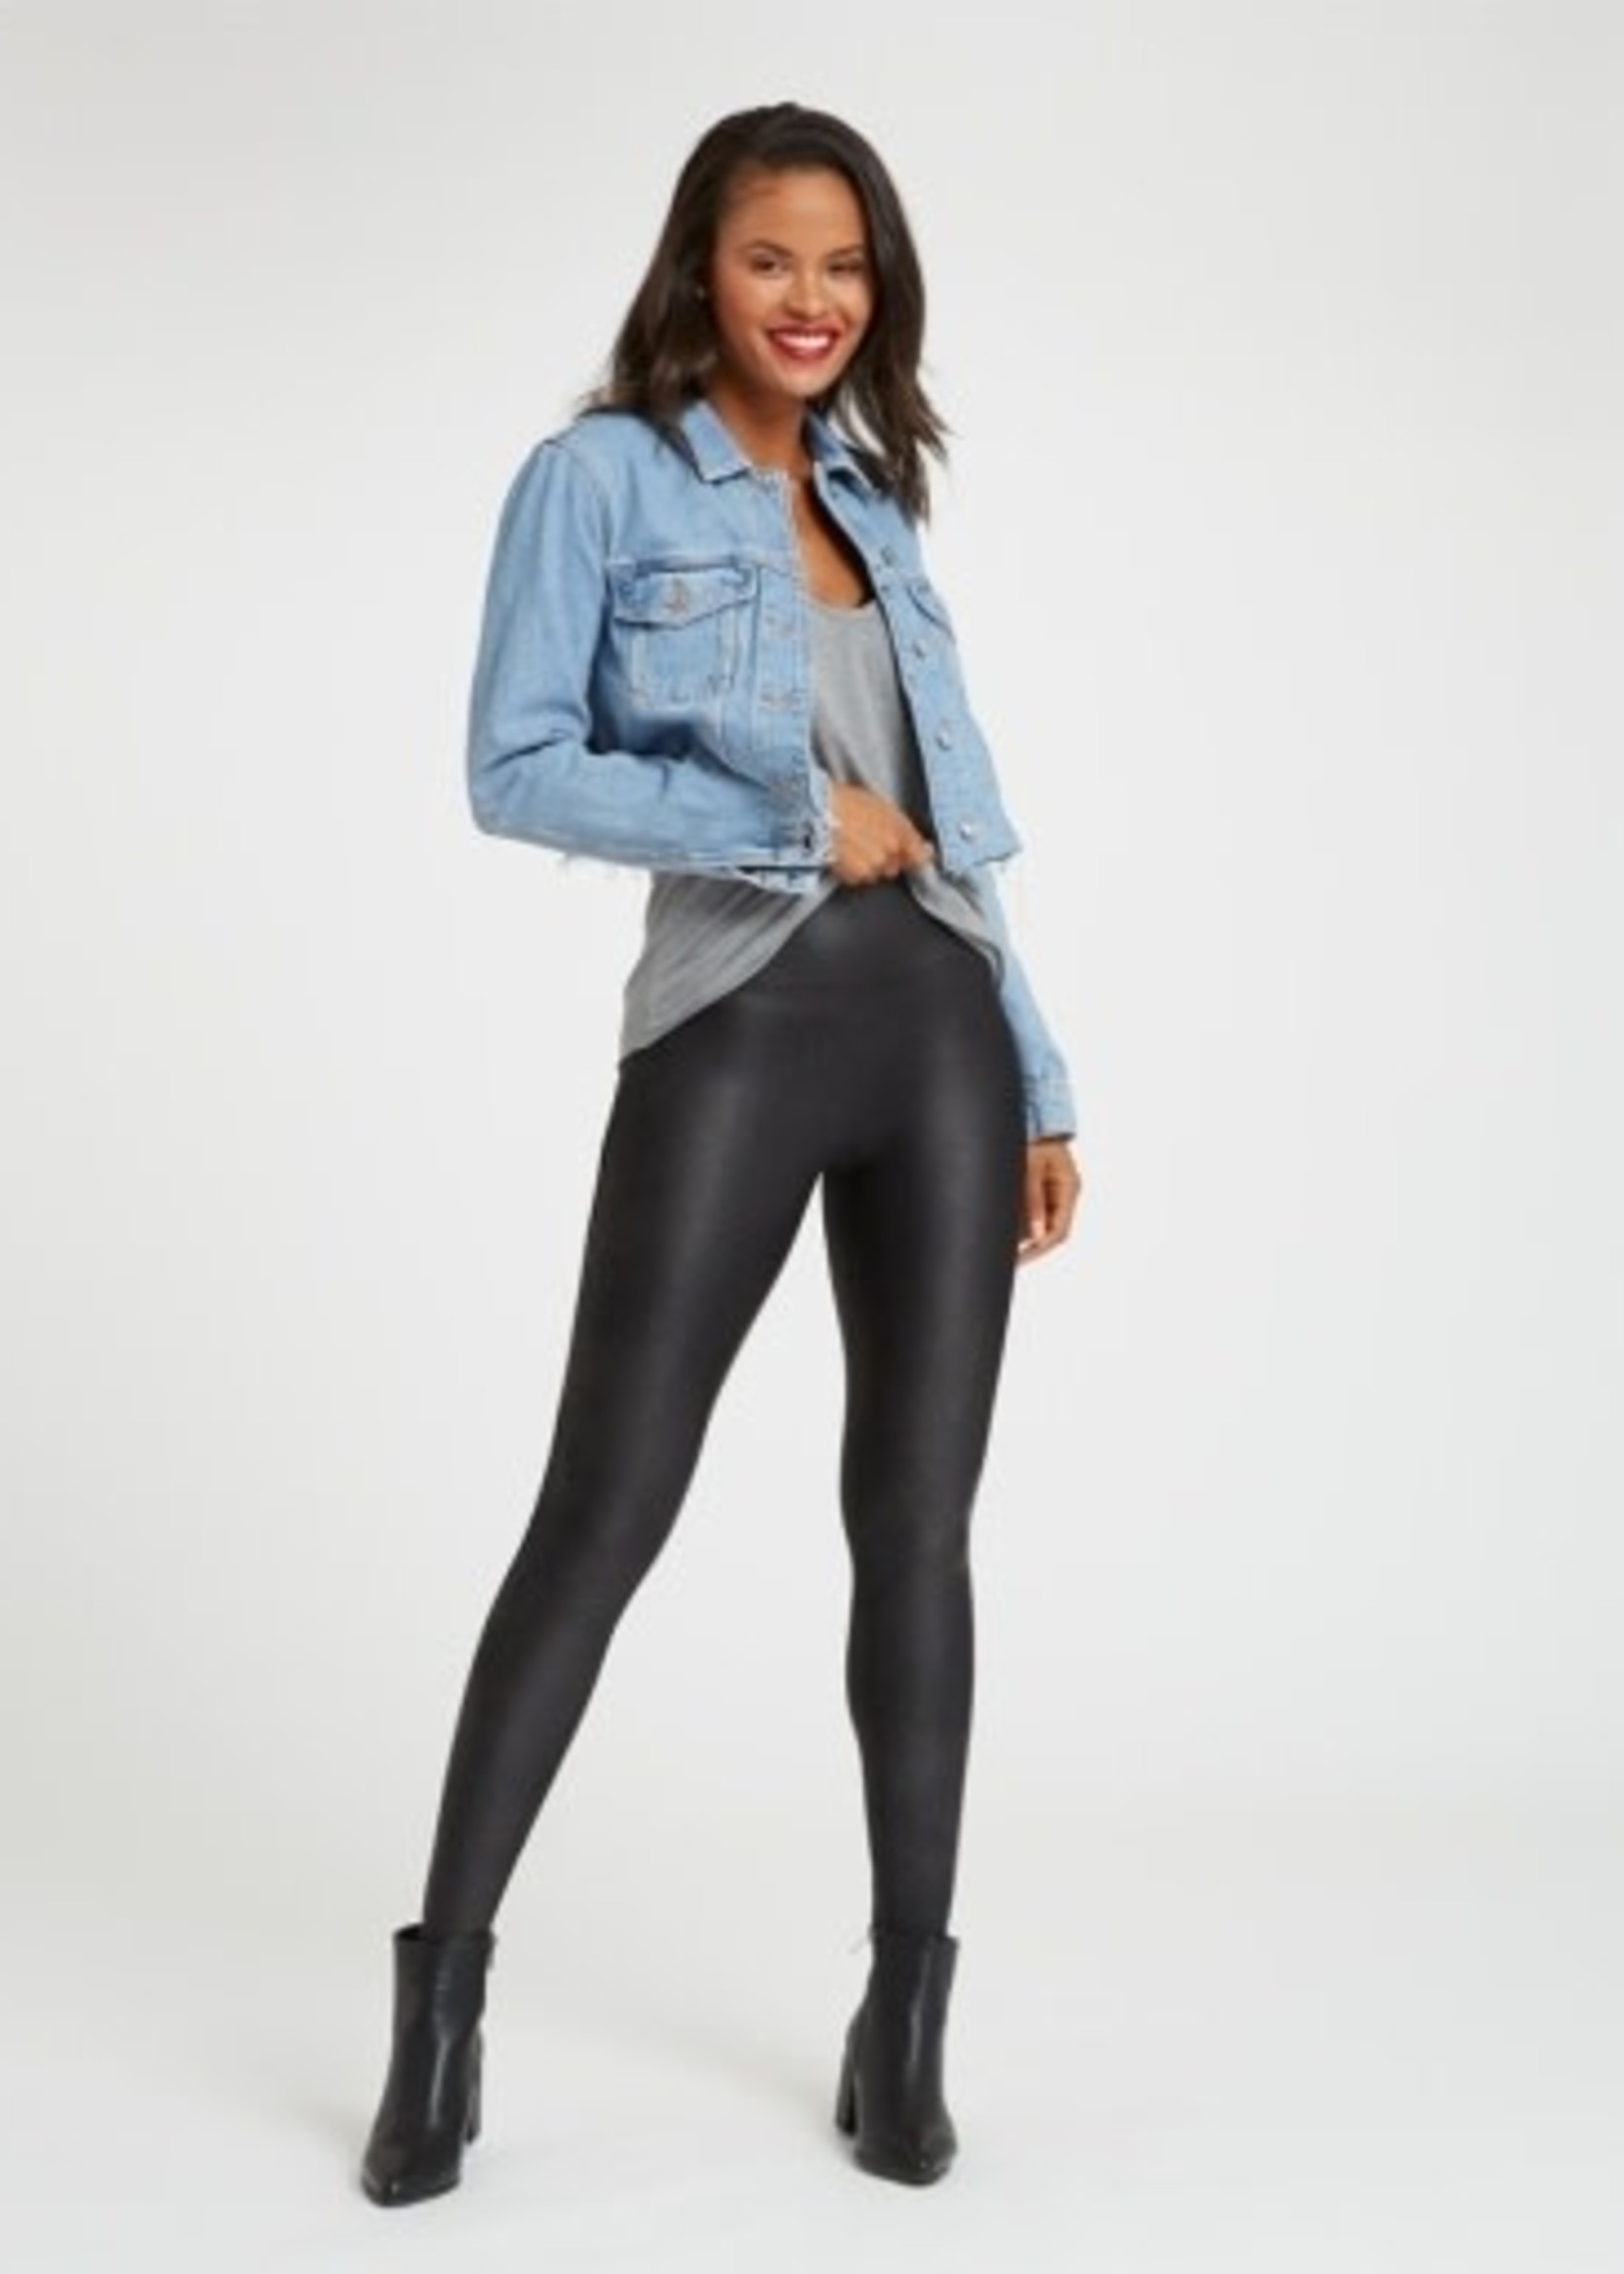 Plus Size Spanx Faux Leather Leggings  International Society of Precision  Agriculture